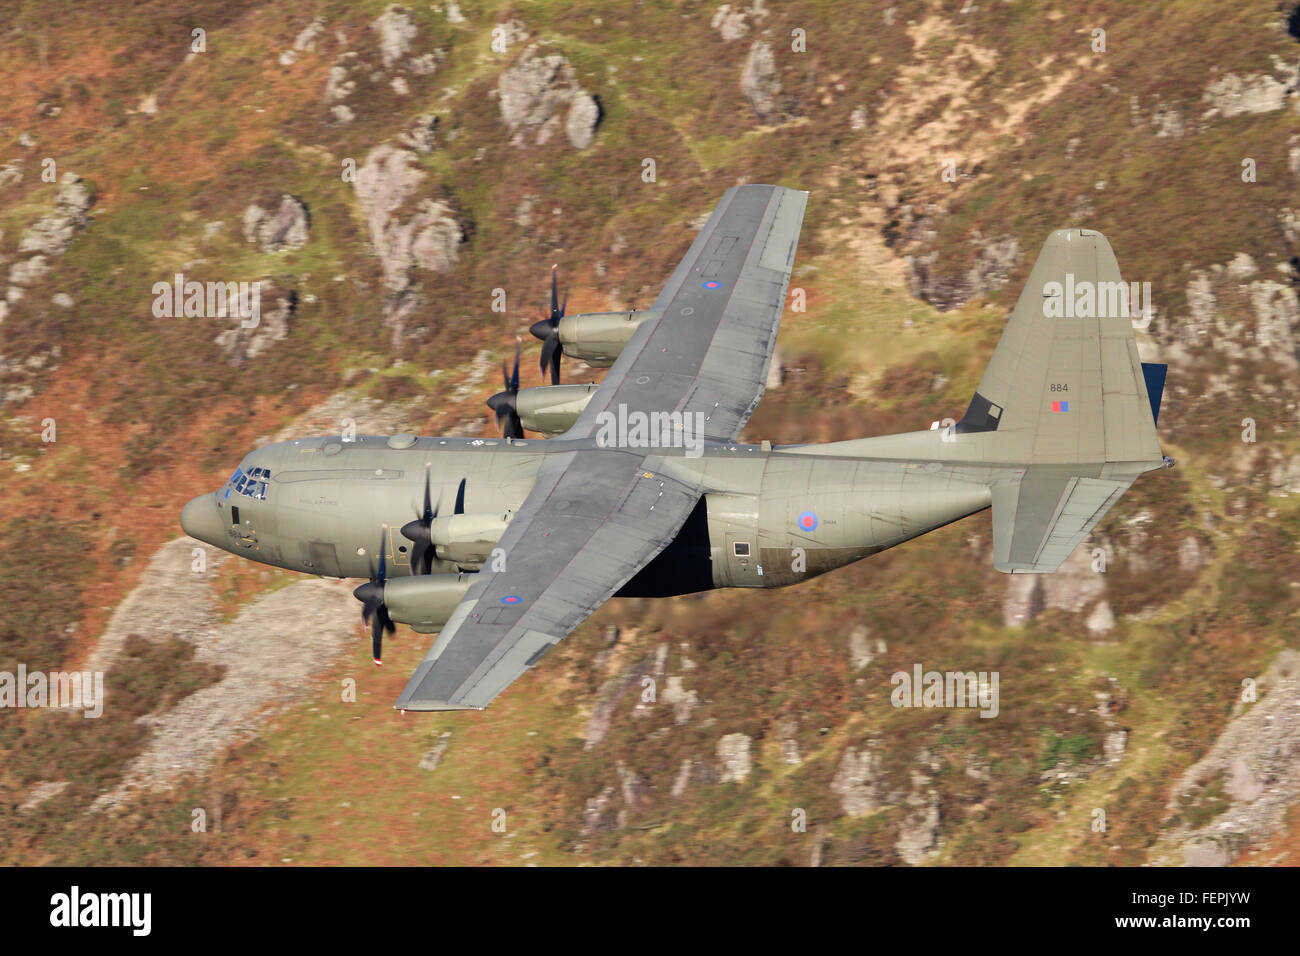 RAF C-130 Hercules aircraft flying low-level in Wales, UK. Stock Photo